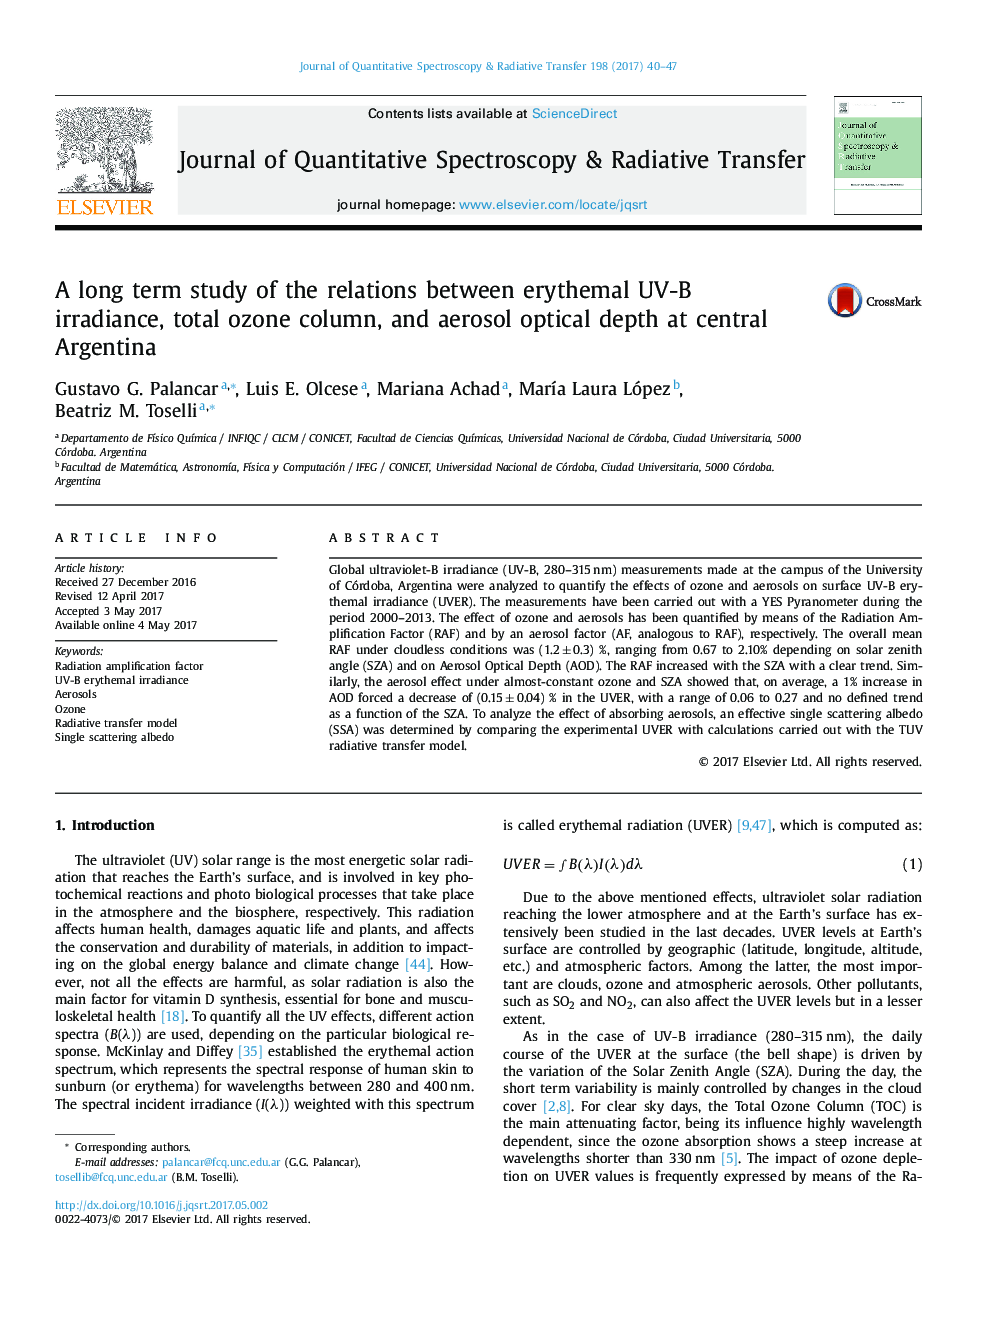 A long term study of the relations between erythemal UV-B irradiance, total ozone column, and aerosol optical depth at central Argentina